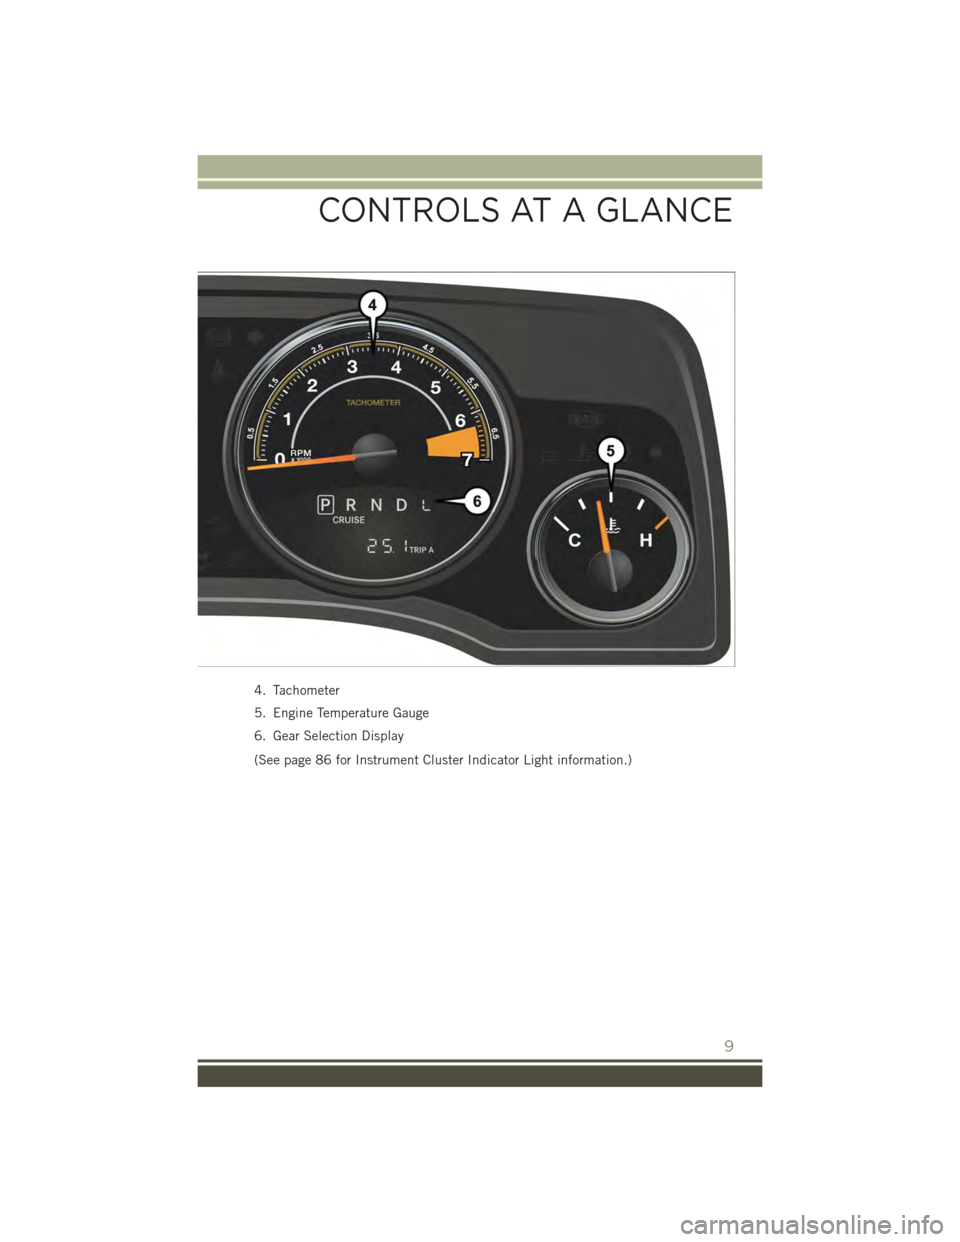 JEEP PATRIOT 2015 1.G User Guide 4. Tachometer
5. Engine Temperature Gauge
6. Gear Selection Display
(See page 86 for Instrument Cluster Indicator Light information.)
CONTROLS AT A GLANCE
9 